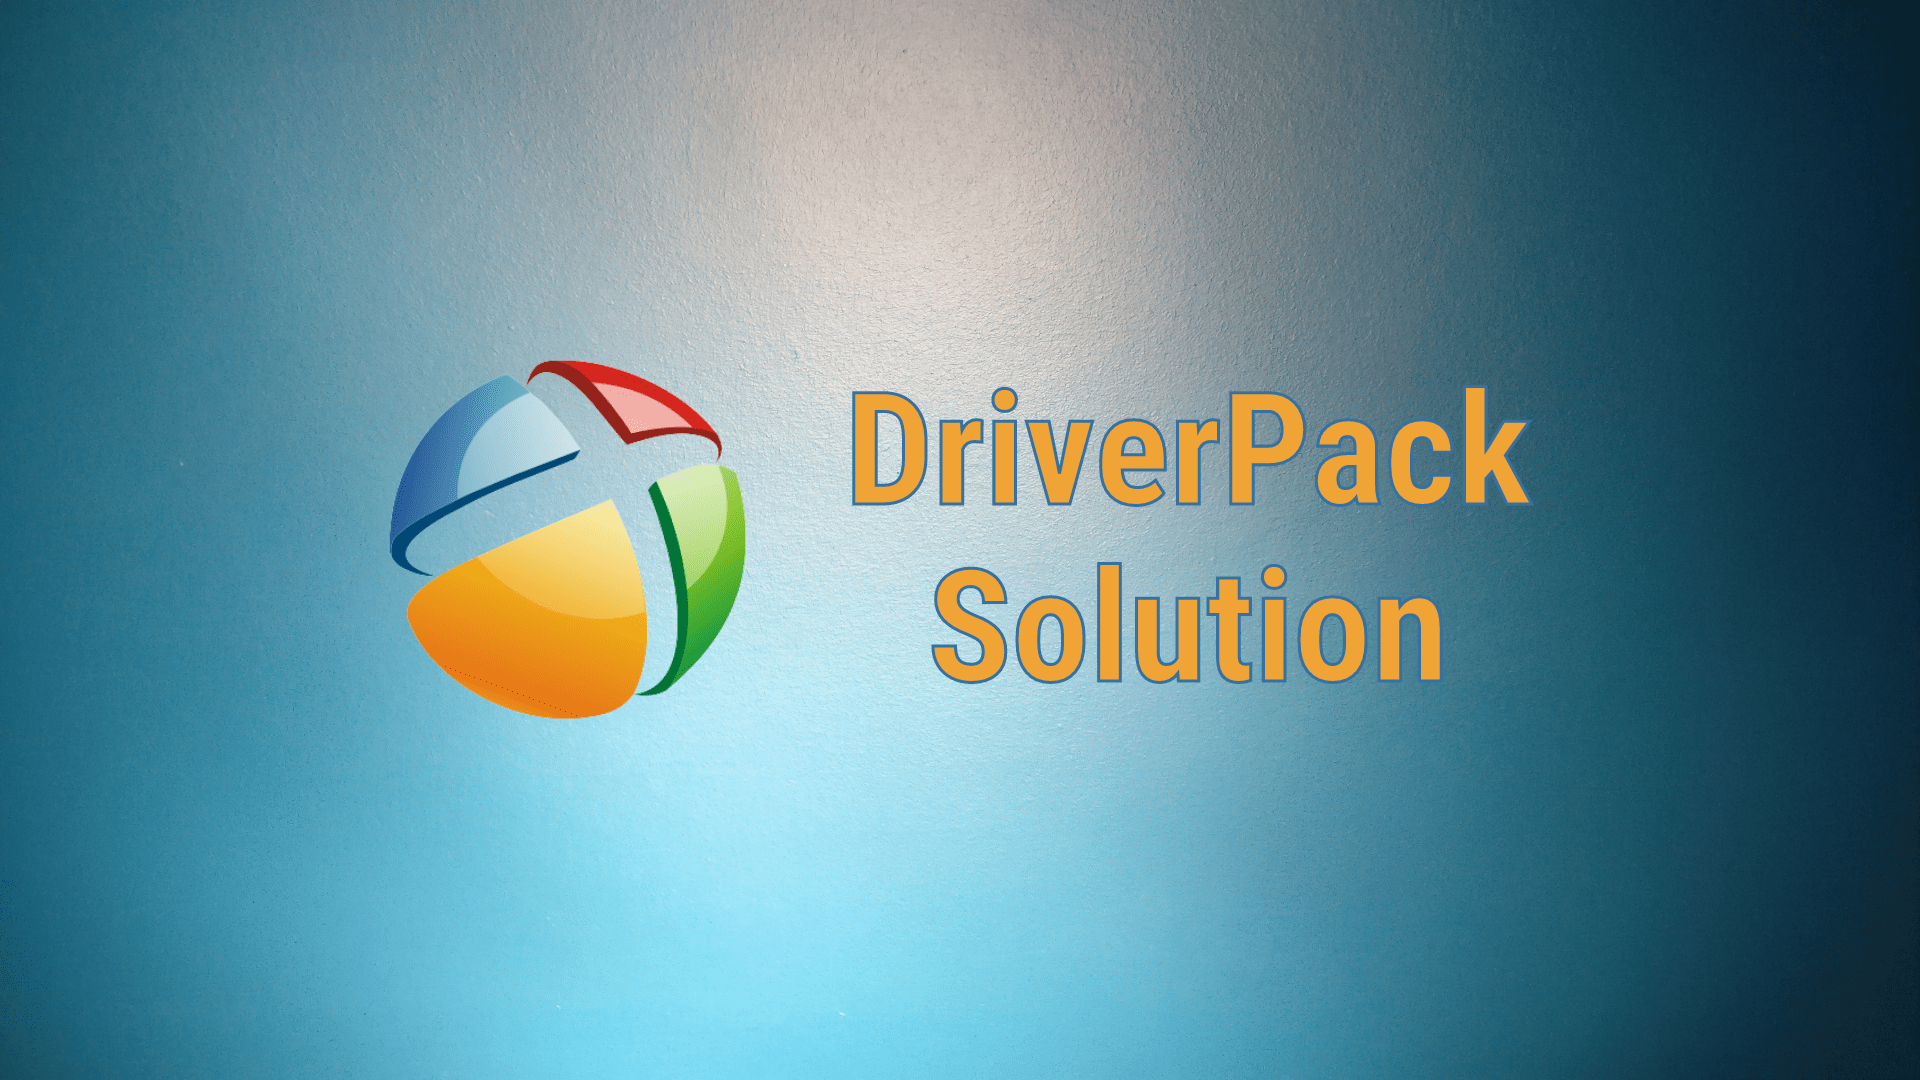 Driverpack Solution Online 2022